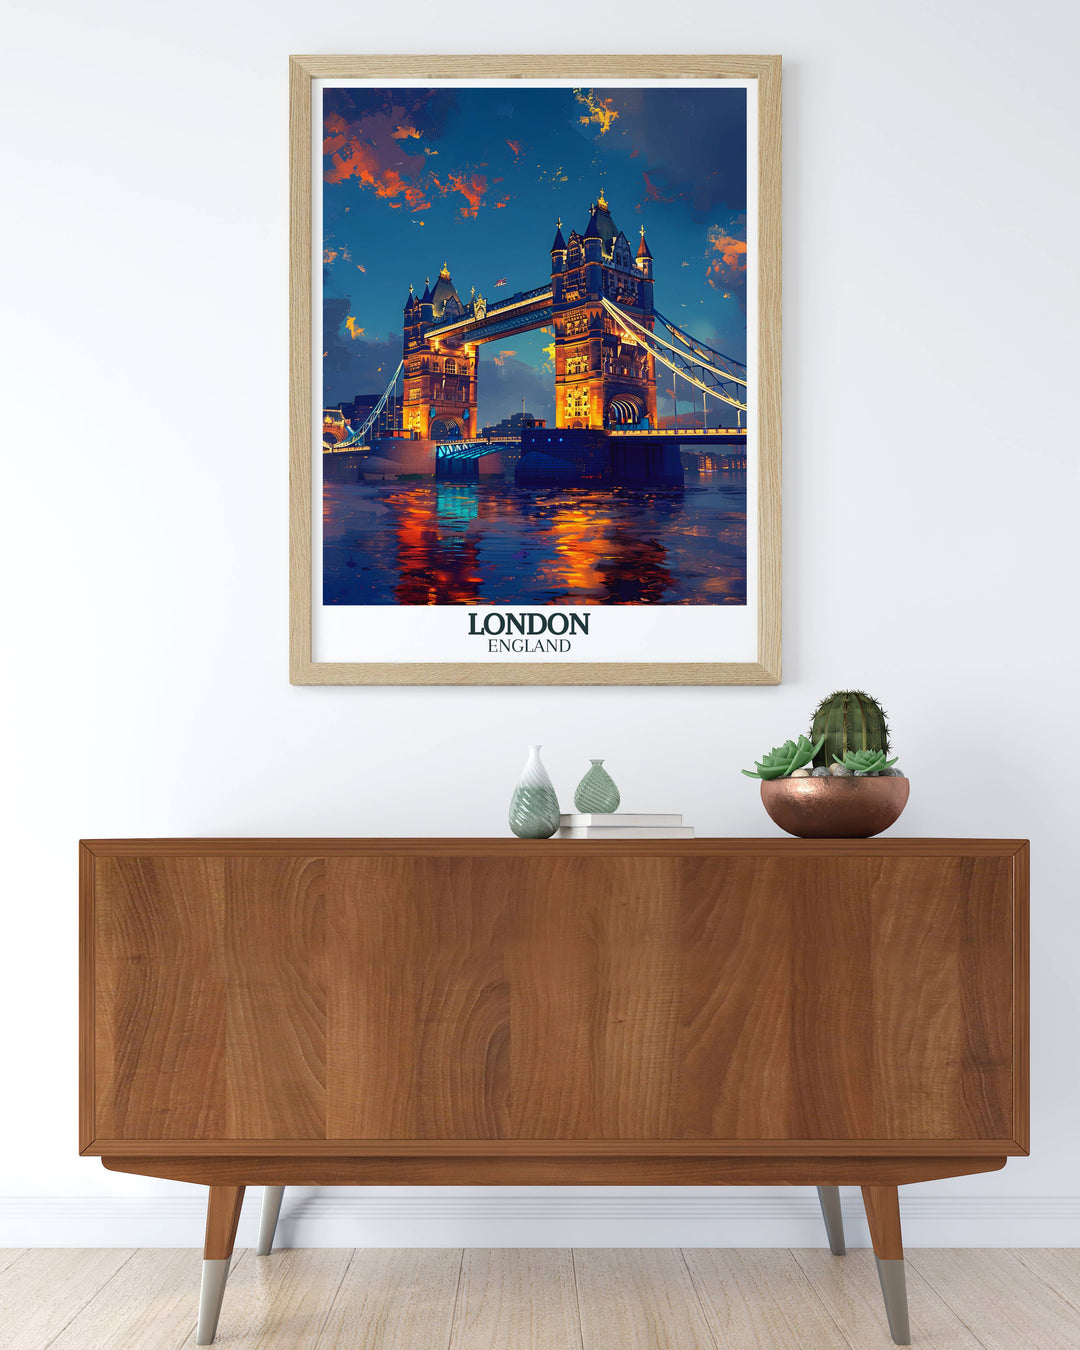 Poster of Tower Bridge in winter, capturing the landmark with a snowy backdrop, great for seasonal decor.